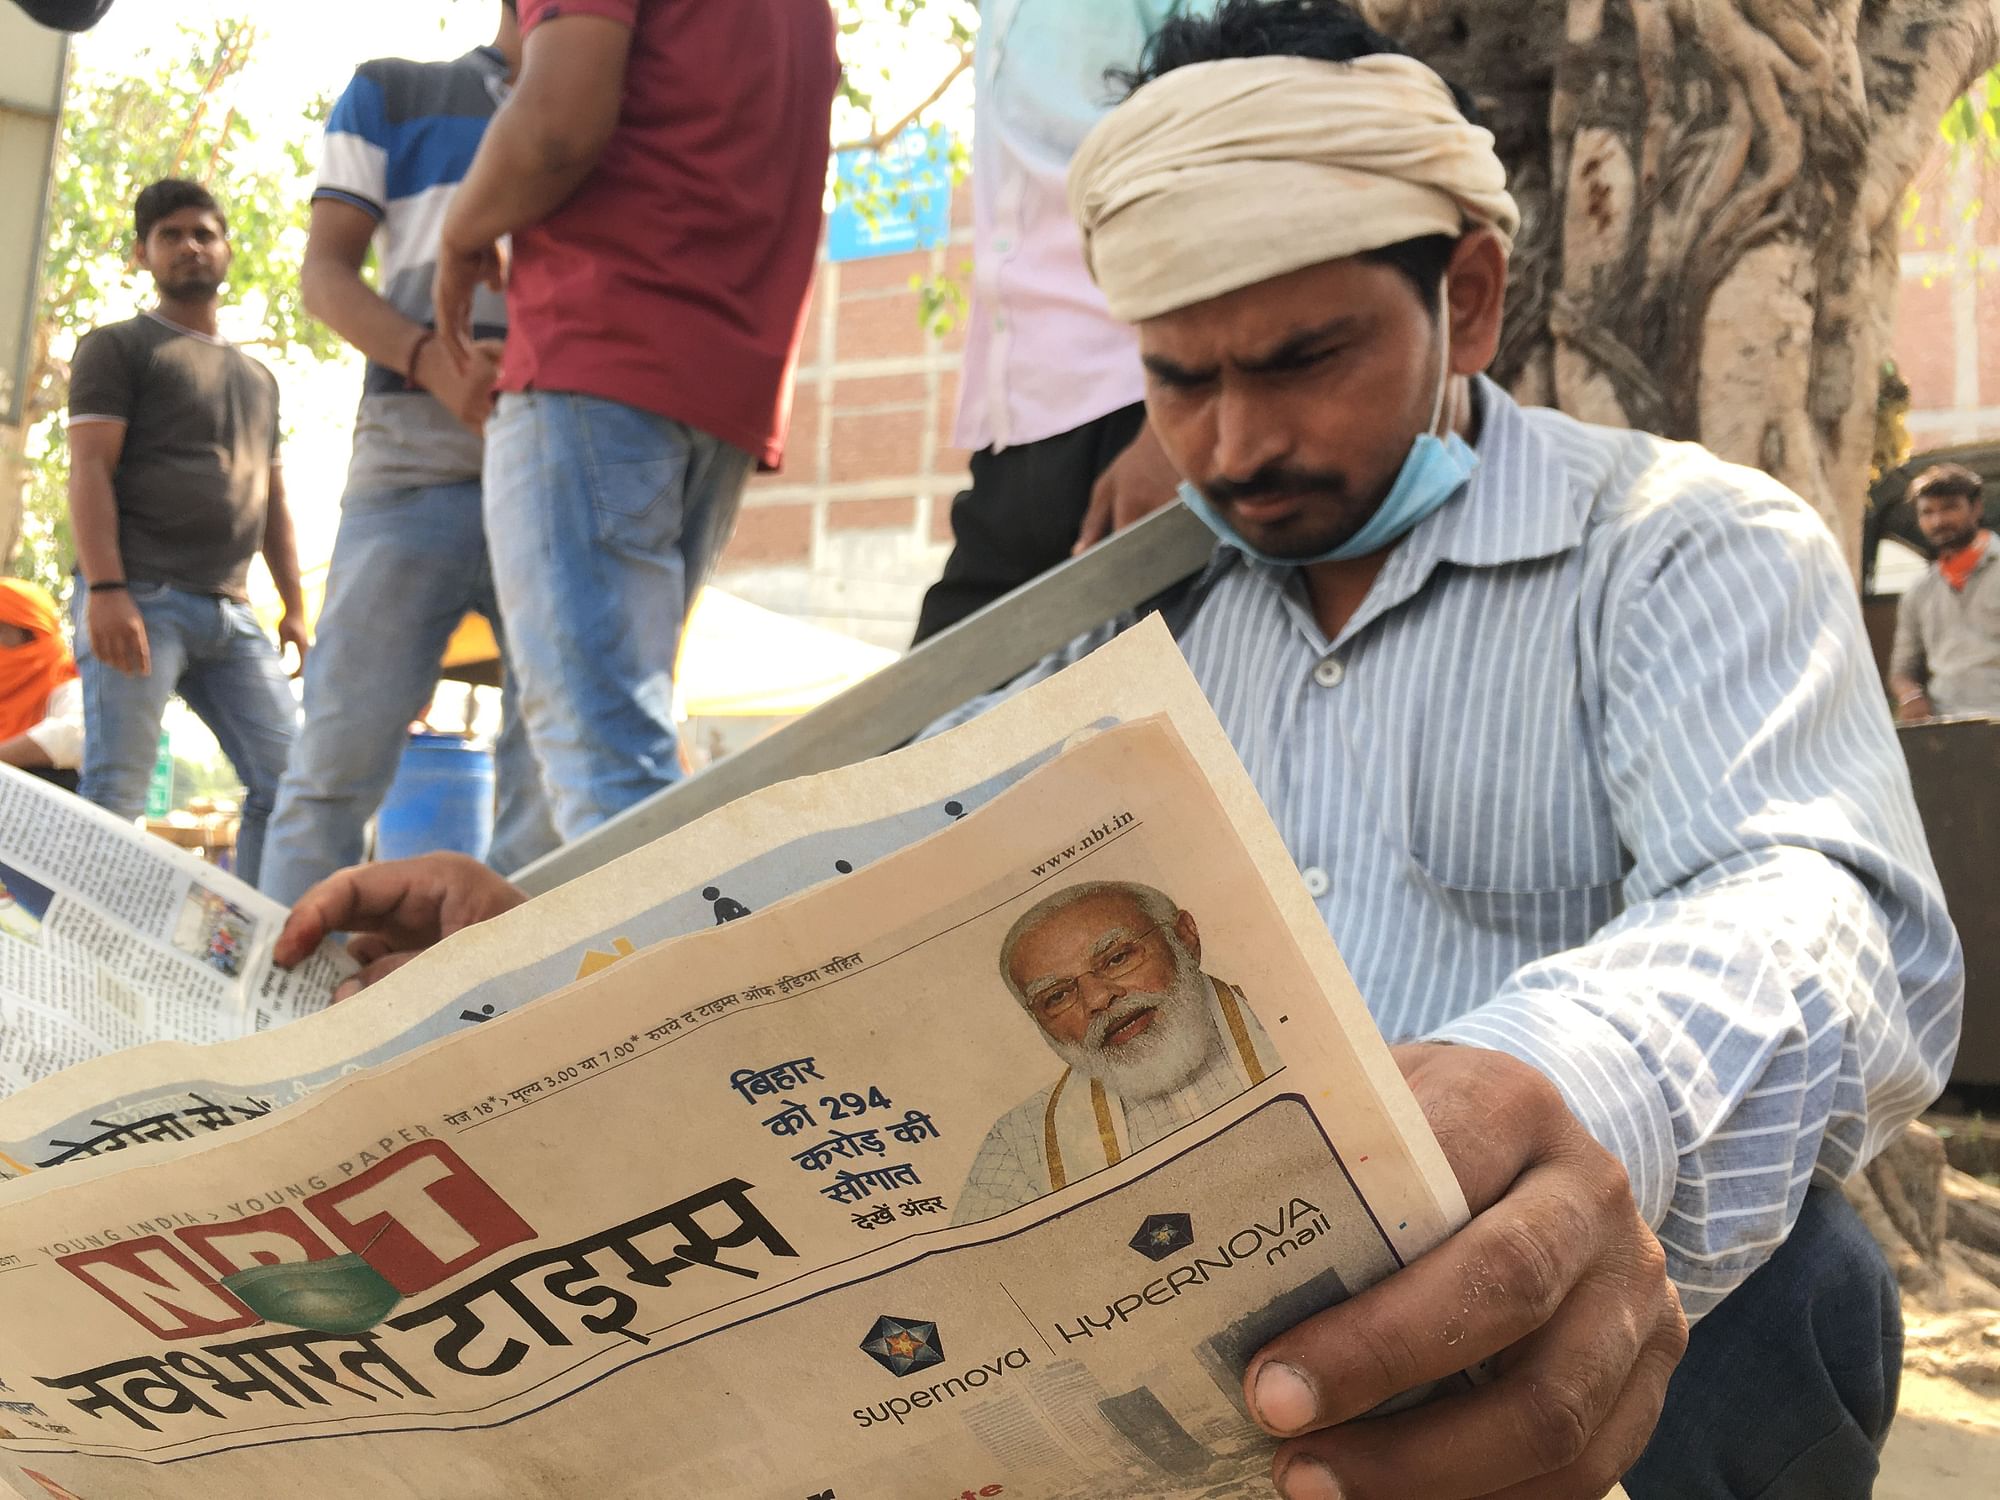 A daily wage earner reading newspaper at Noida Labour Chowk.